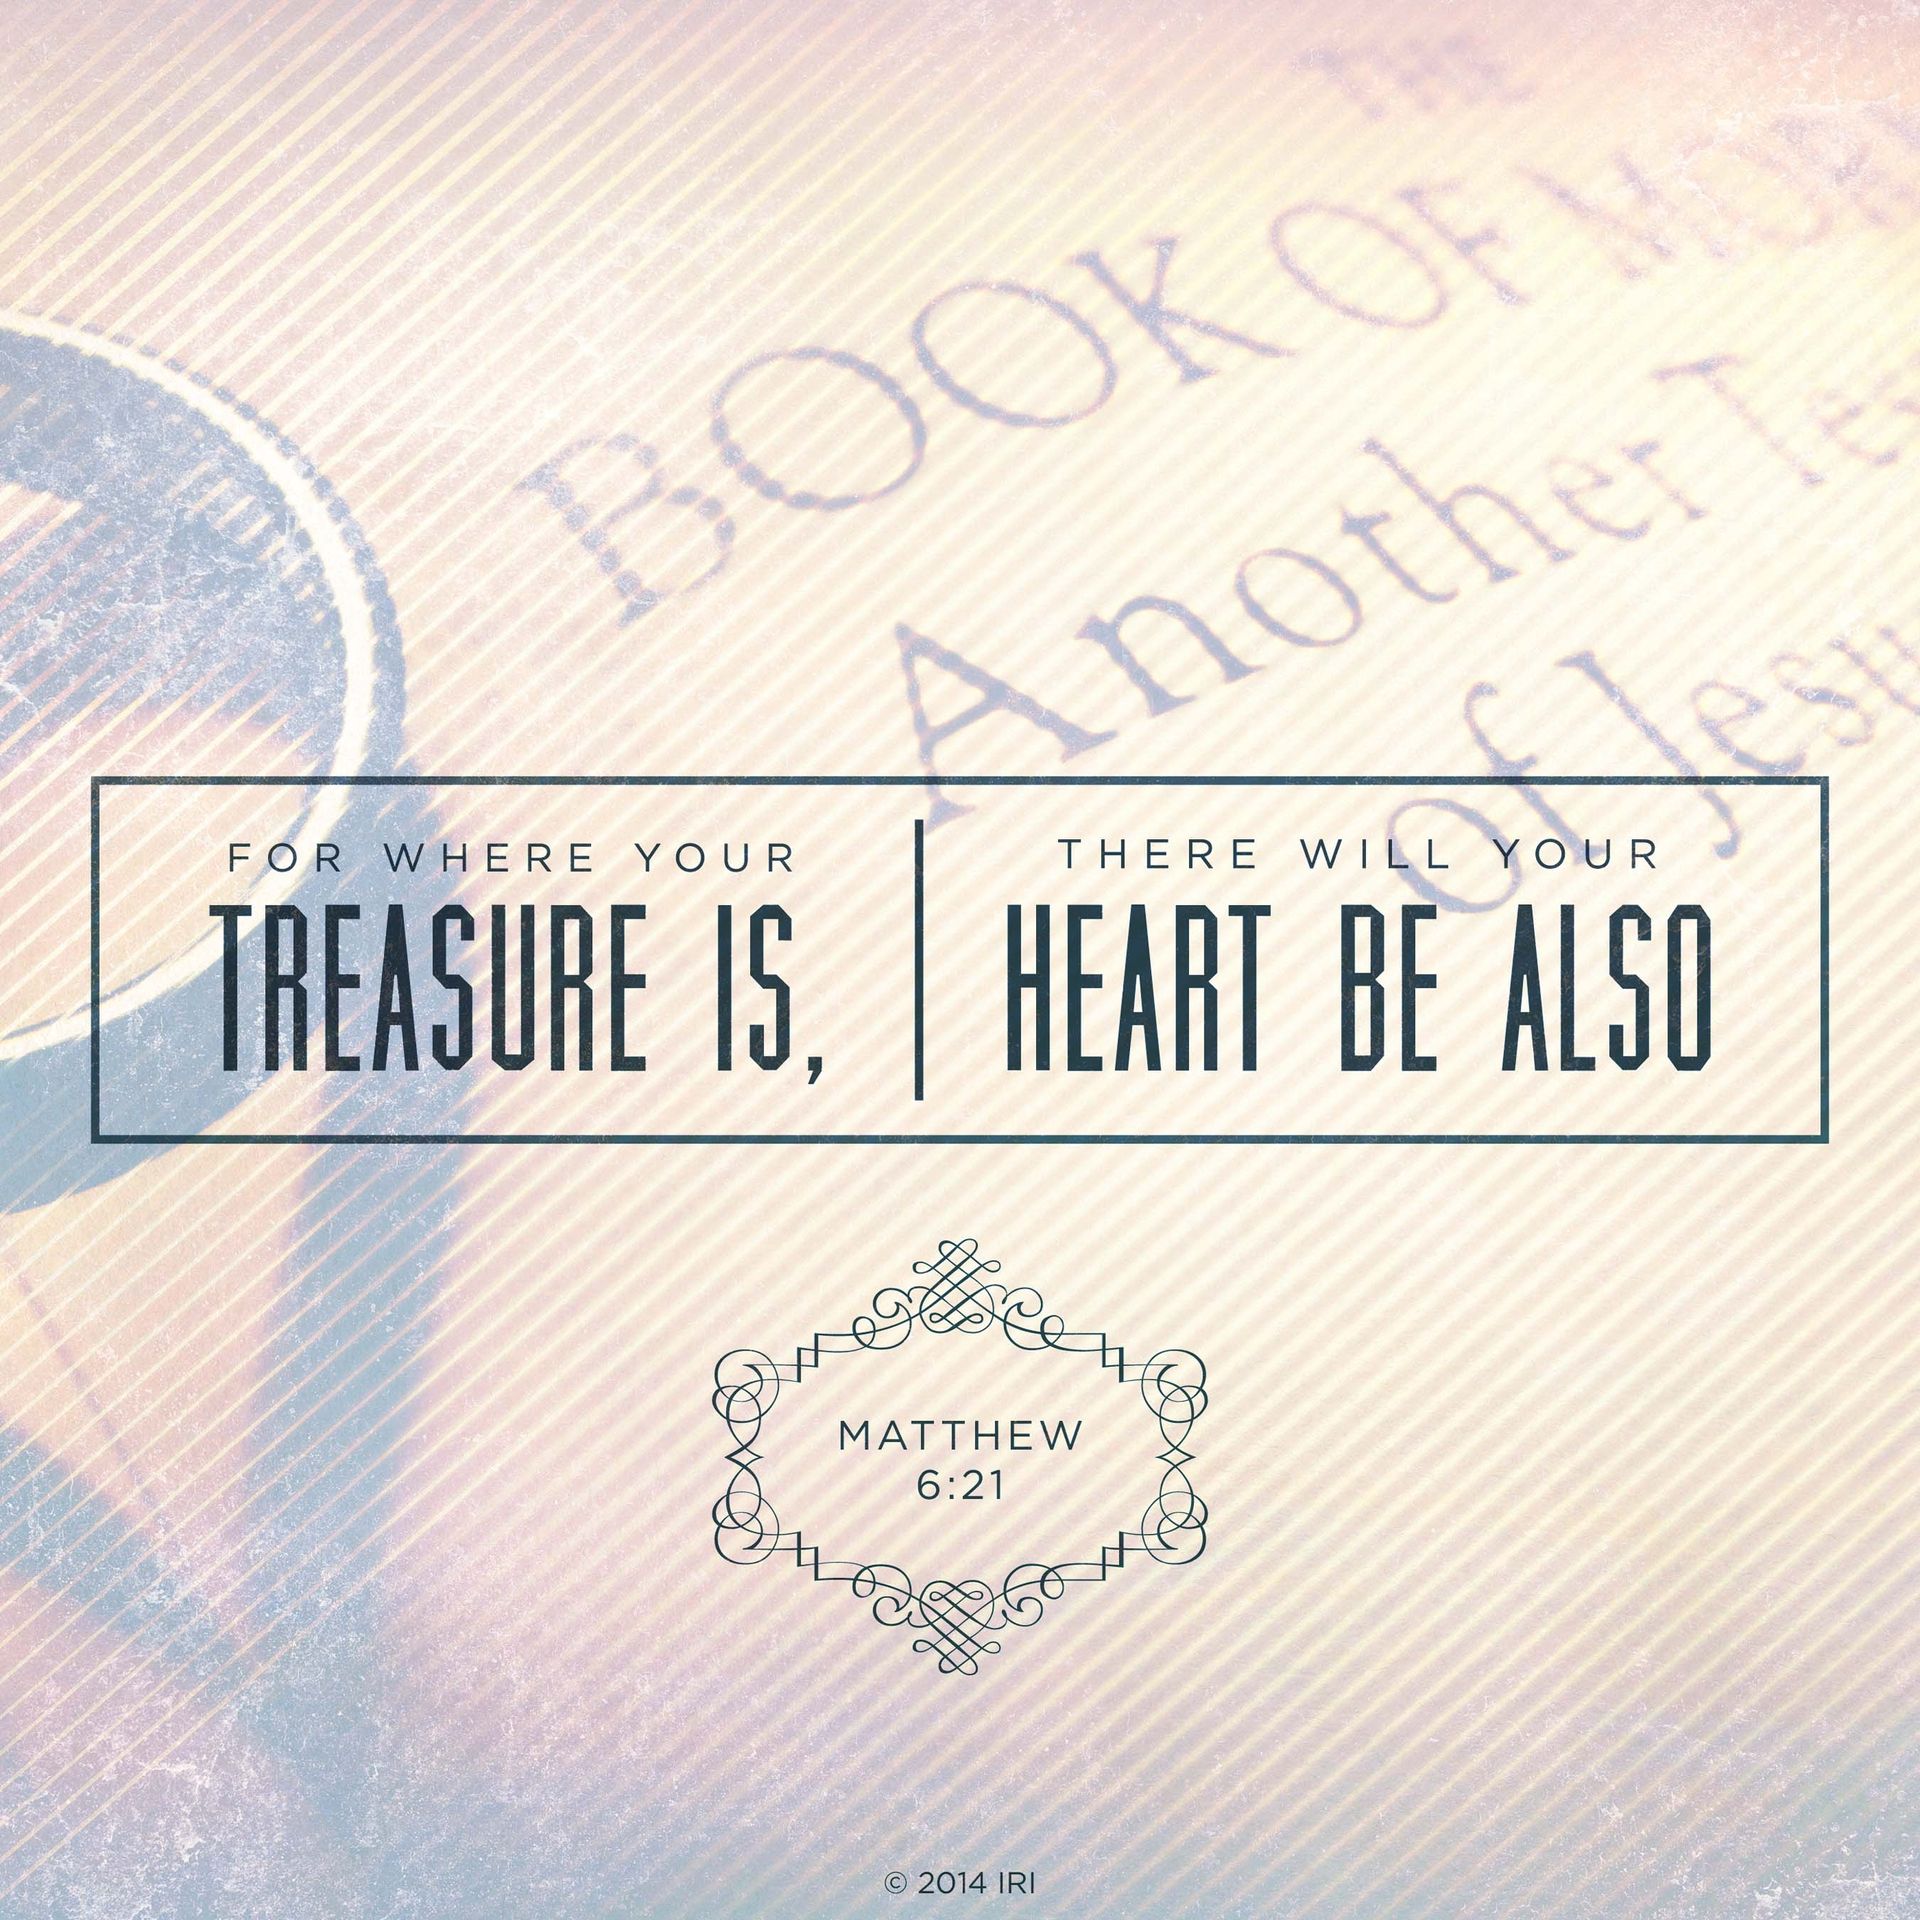 “For where your treasure is, there will your heart be also.”—Matthew 6:21